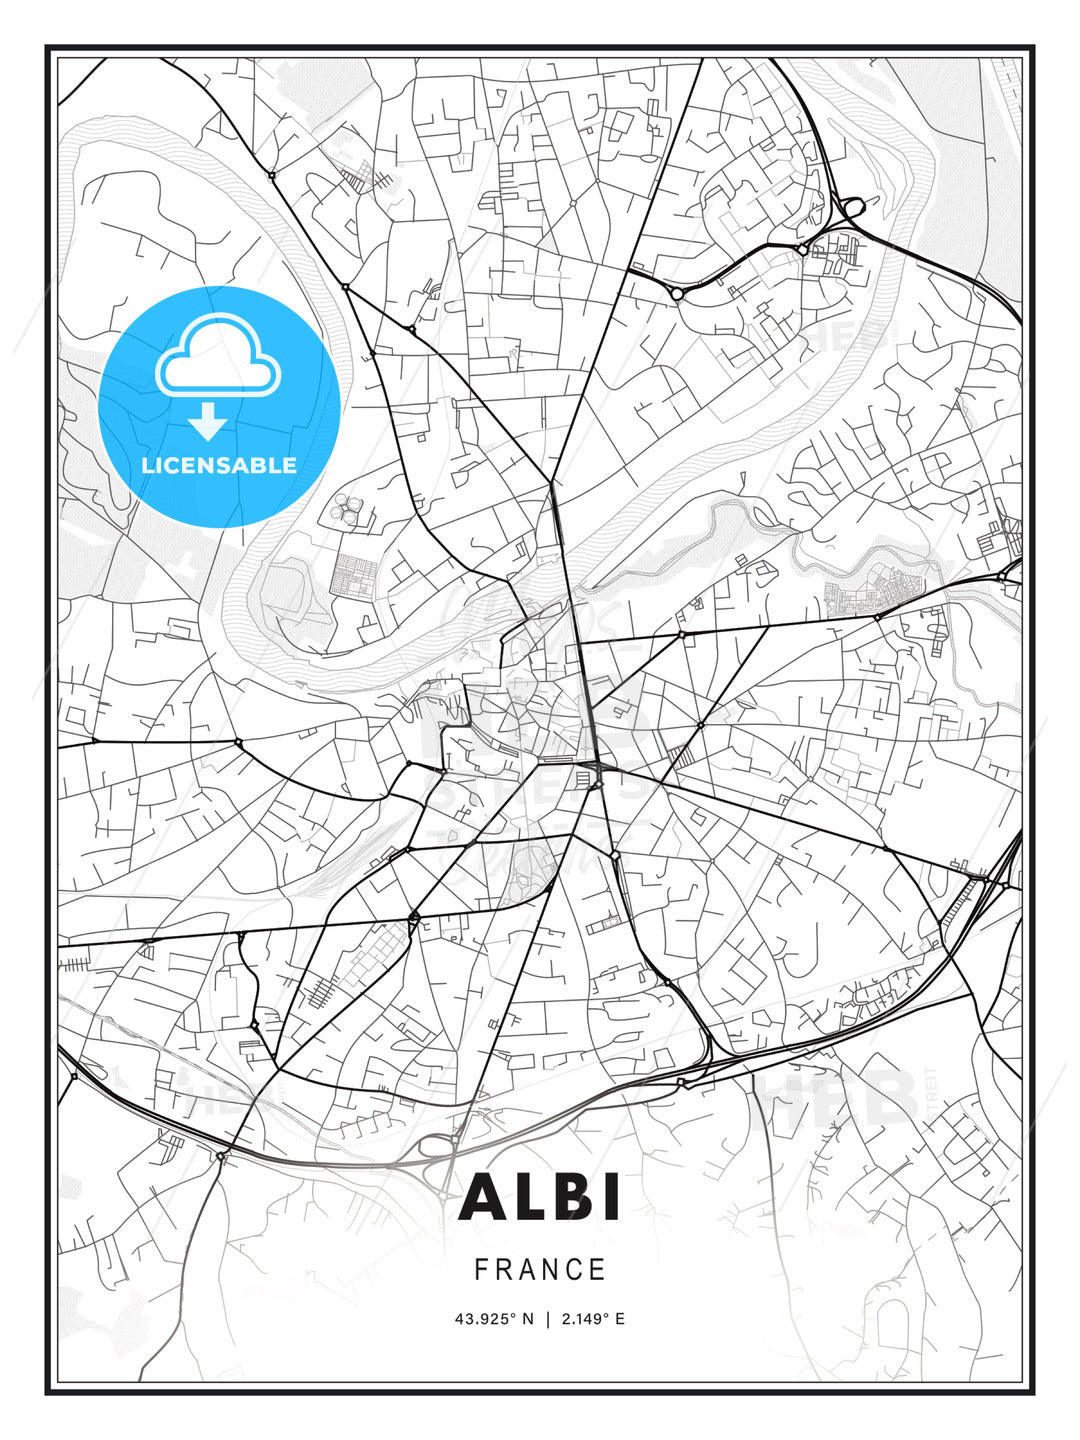 Albi, France, Modern Print Template in Various Formats - HEBSTREITS Sketches